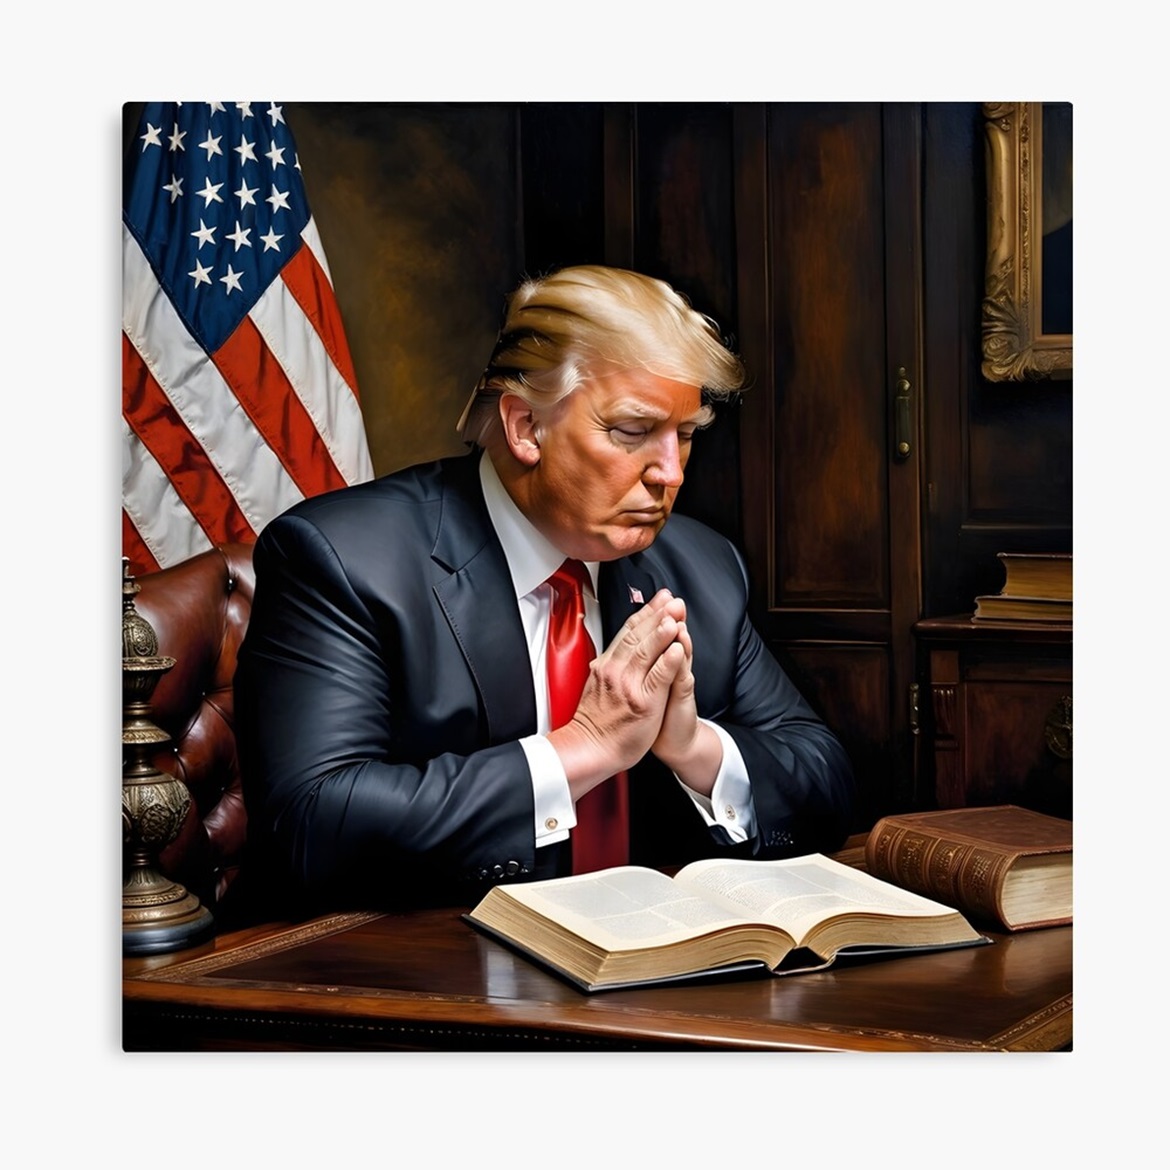 This oil painting depicts Donald Trump sitting at a desk with his hands clasped in prayer. He is surrounded by elements of an office setting, including an open bible and the American flag. This image conveys a sense of solemnity, patriotism, and leadership.